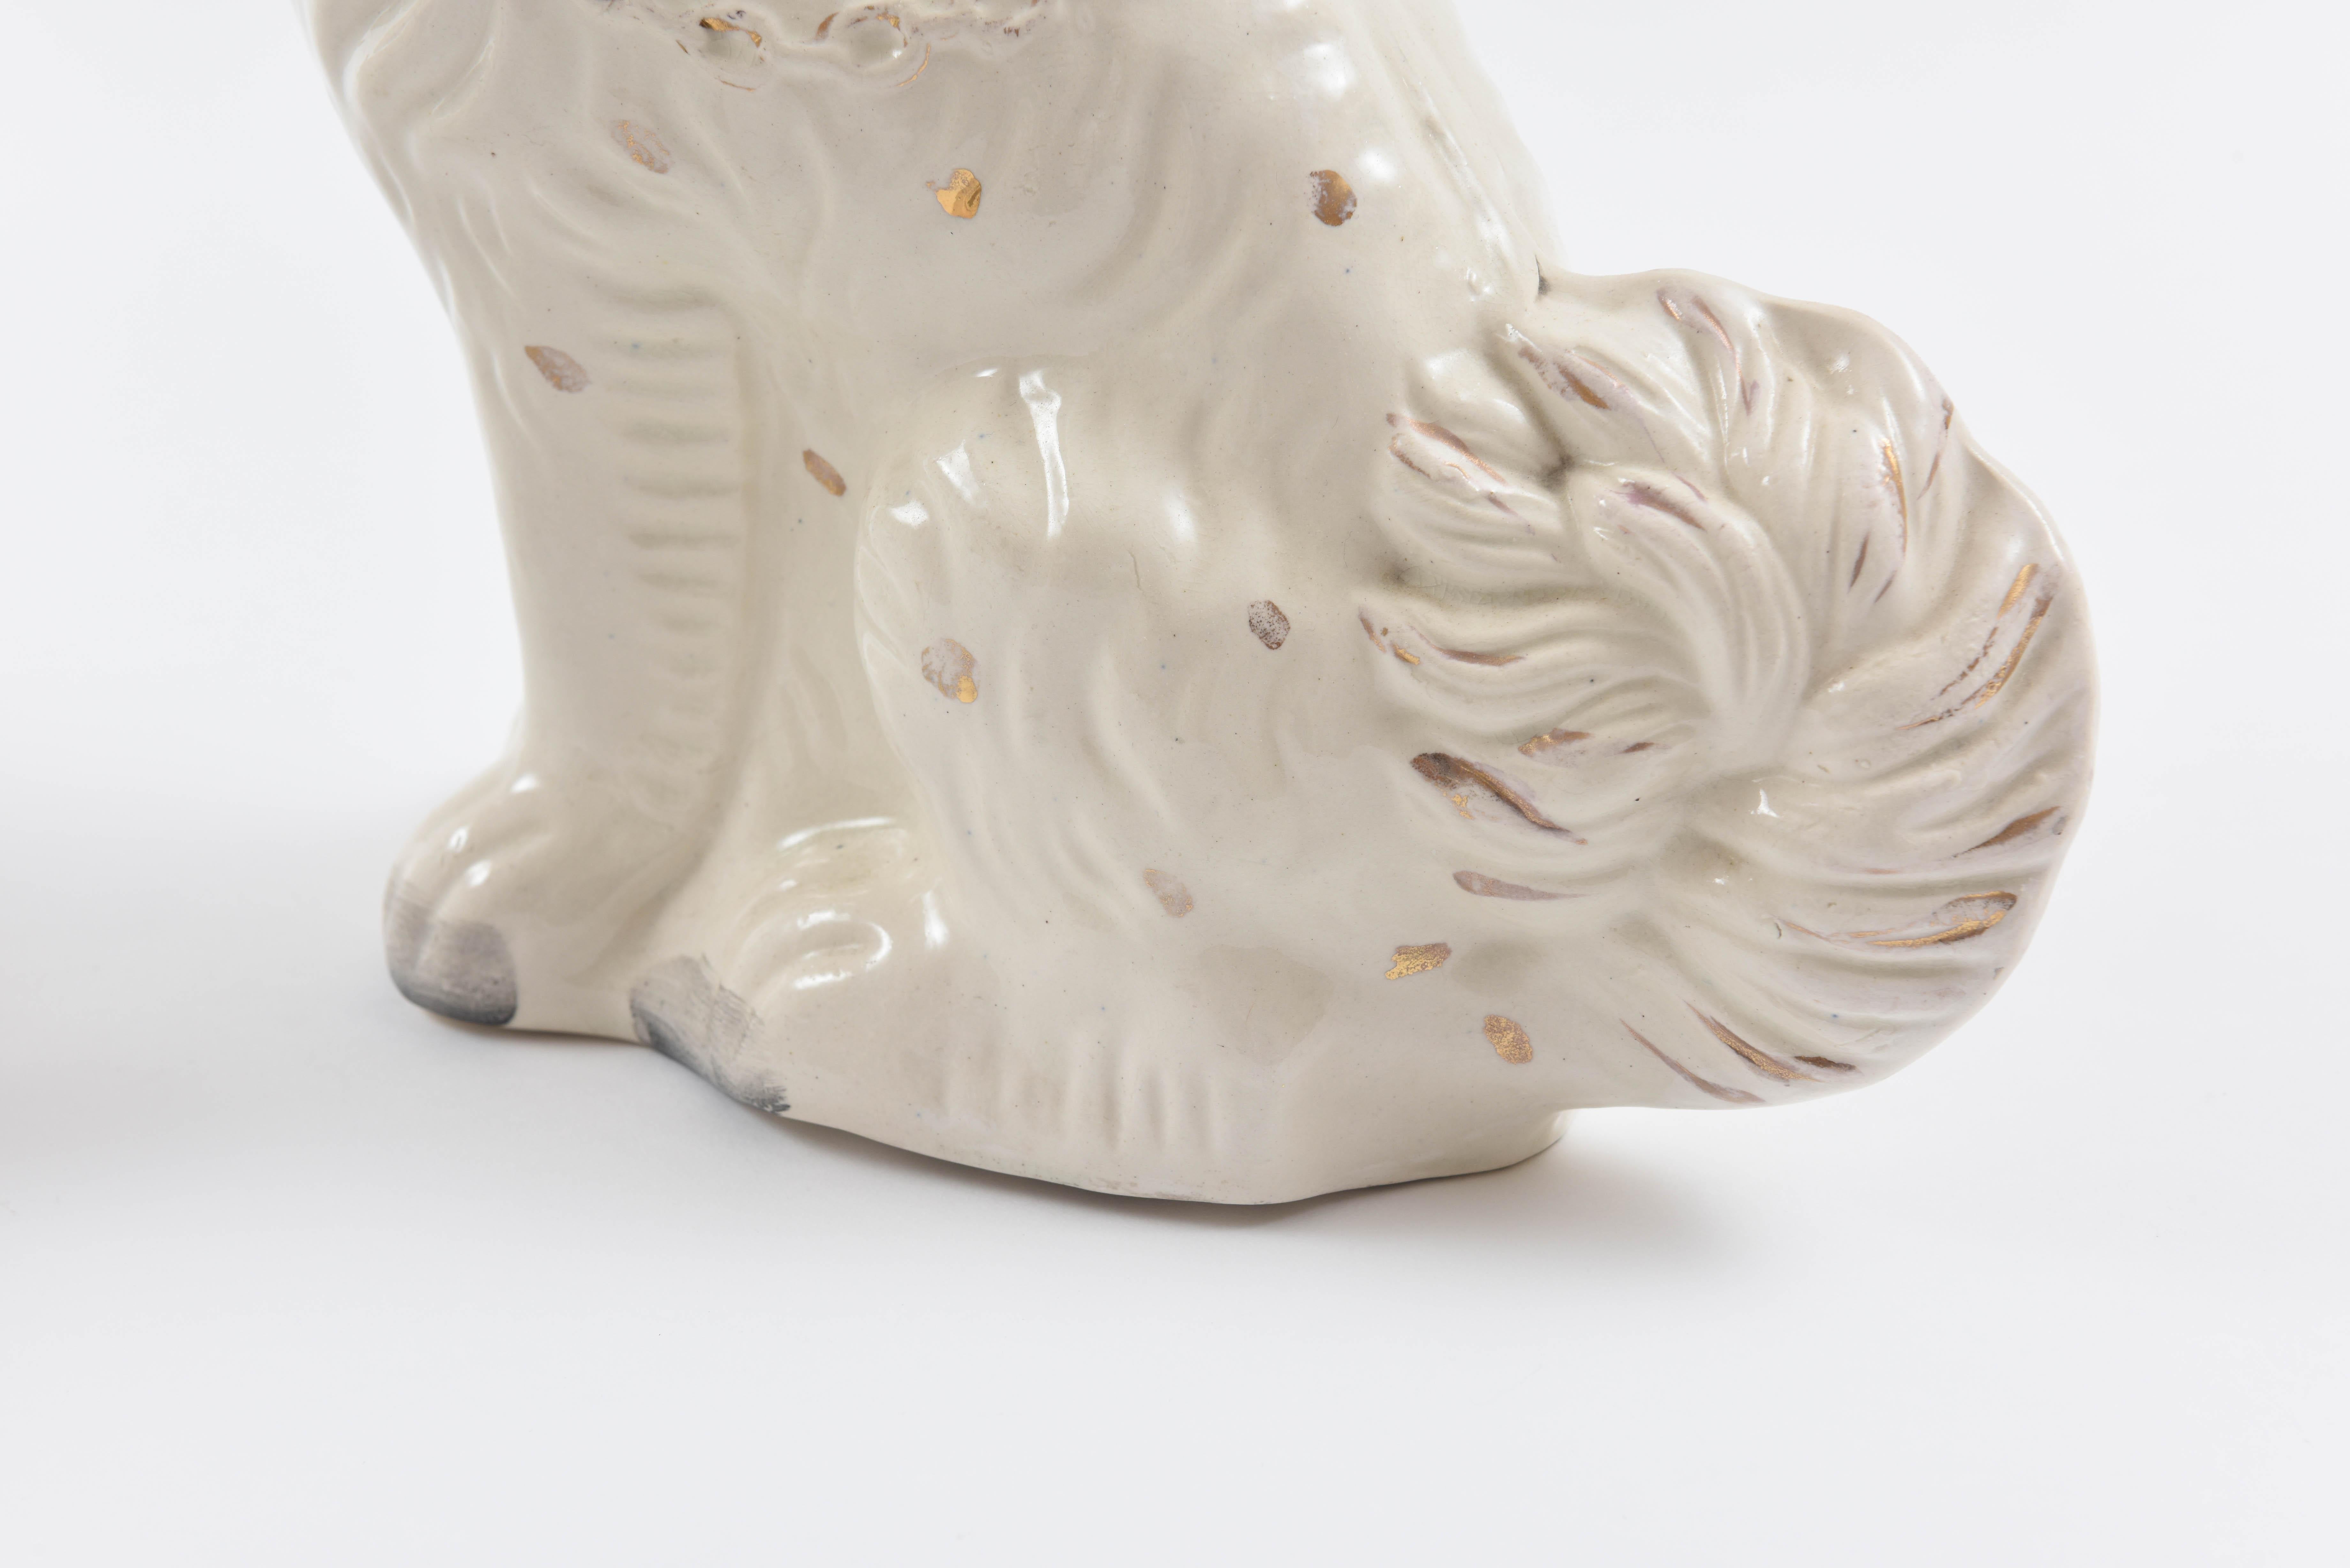 Pair of Staffordshire Dogs, 19th Century with Charming Expressions 2